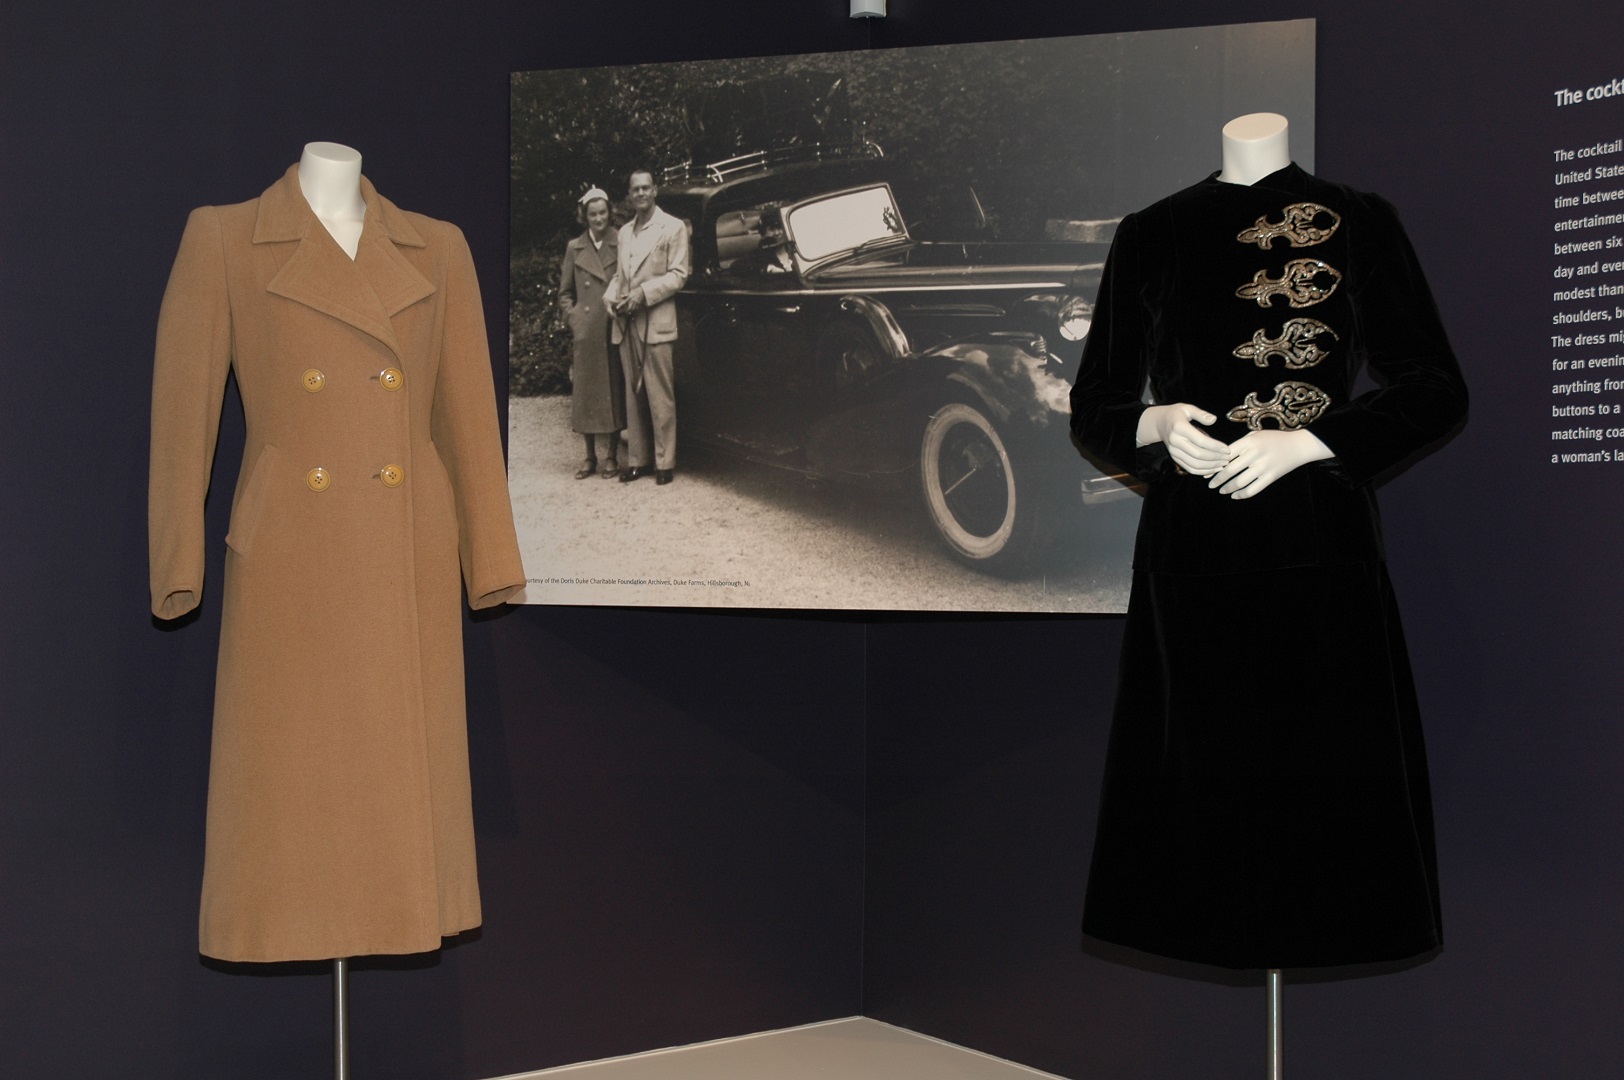 Display of two coats in front of a black and white photograph of Doris, outside in a coat